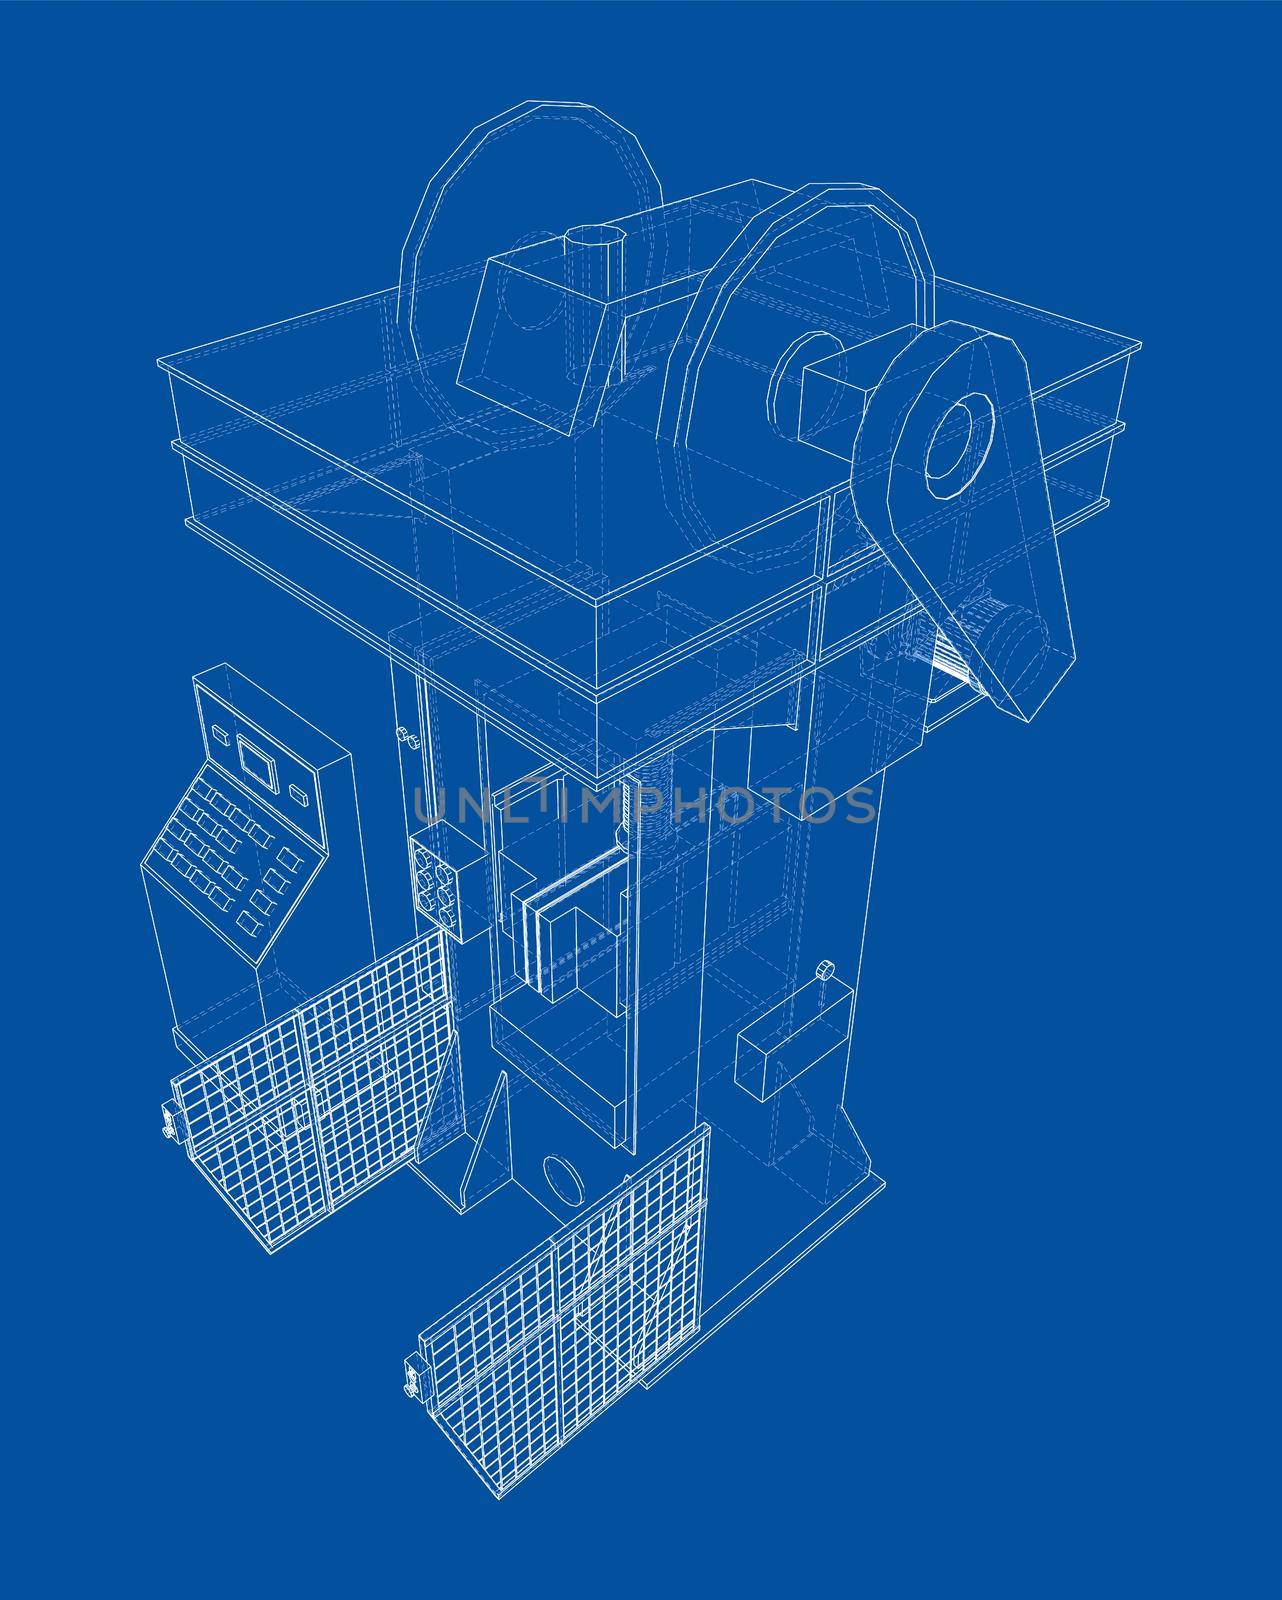 Hydraulic Press. 3d illustration. Wire-frame or blueprint style